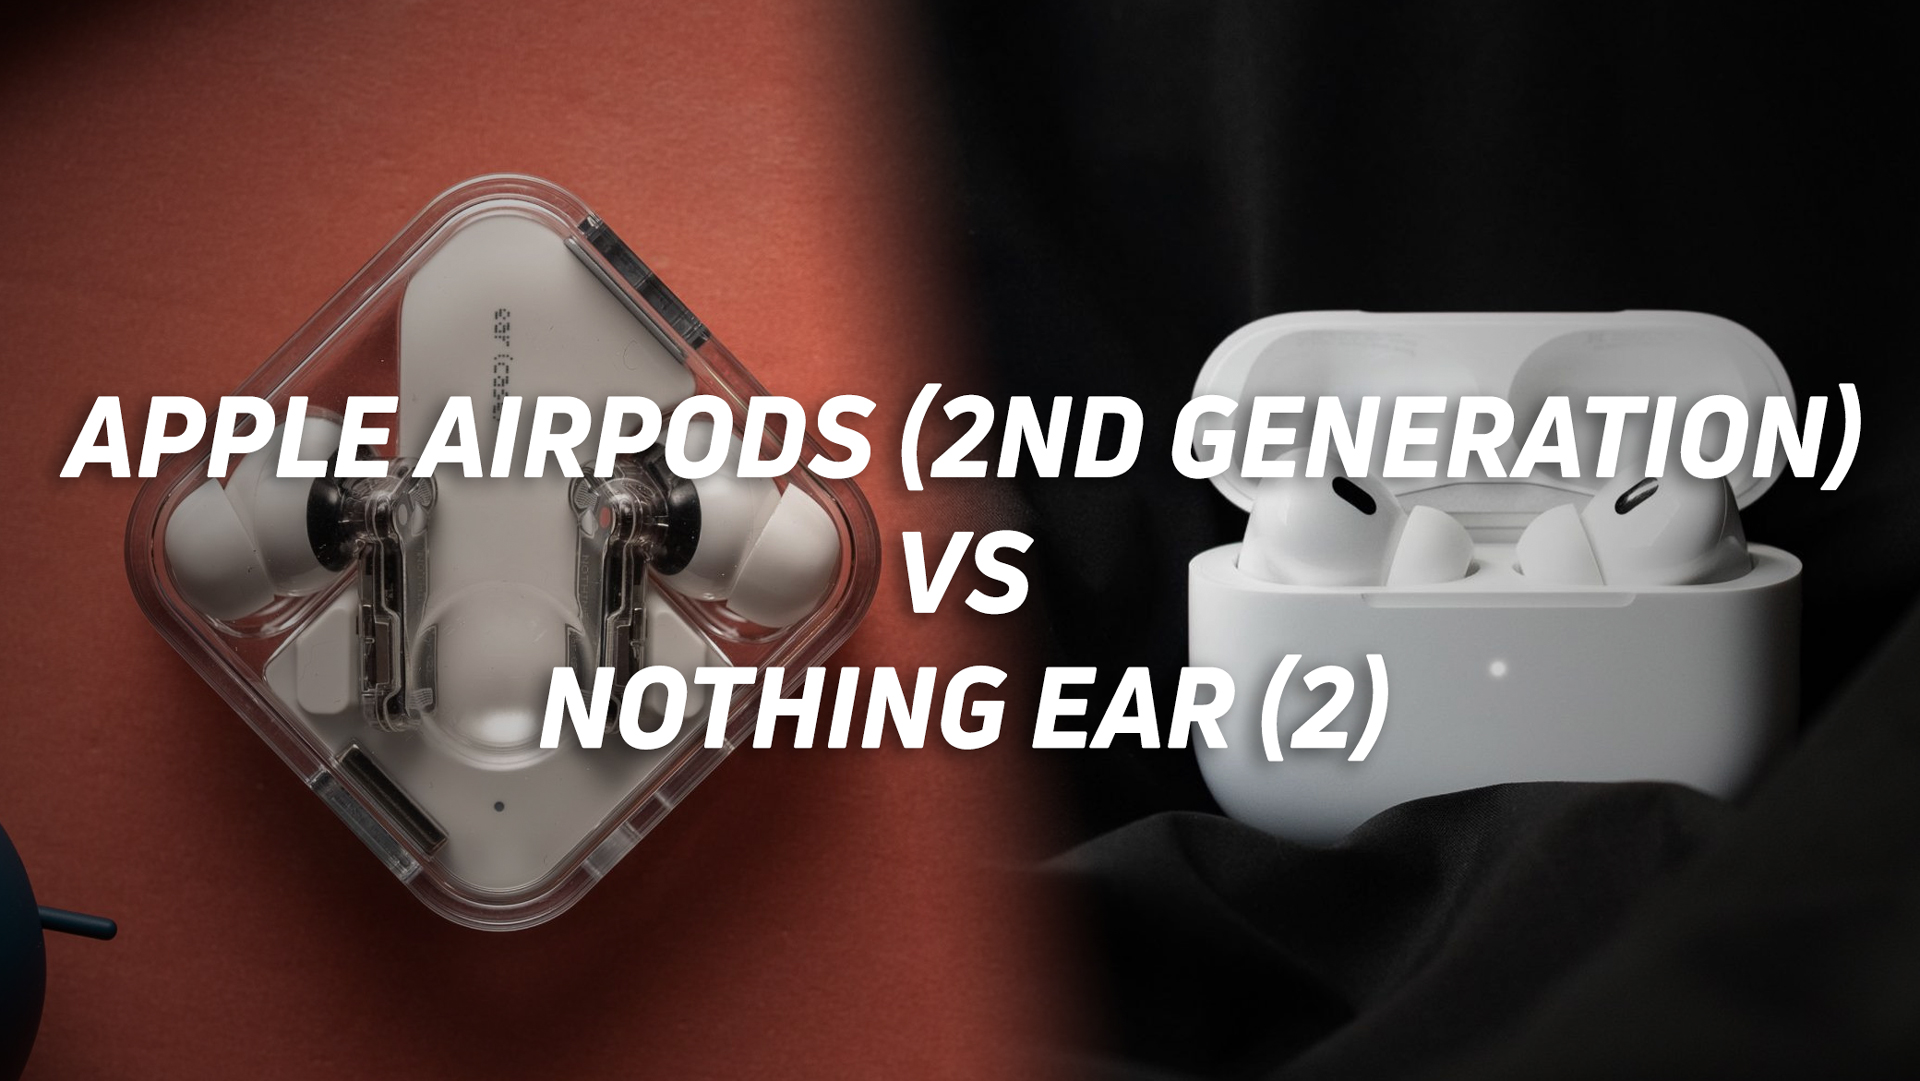 A photo of both the Nothing Ear (2) and the AirPods Pro (2nd generation) set aside each other.